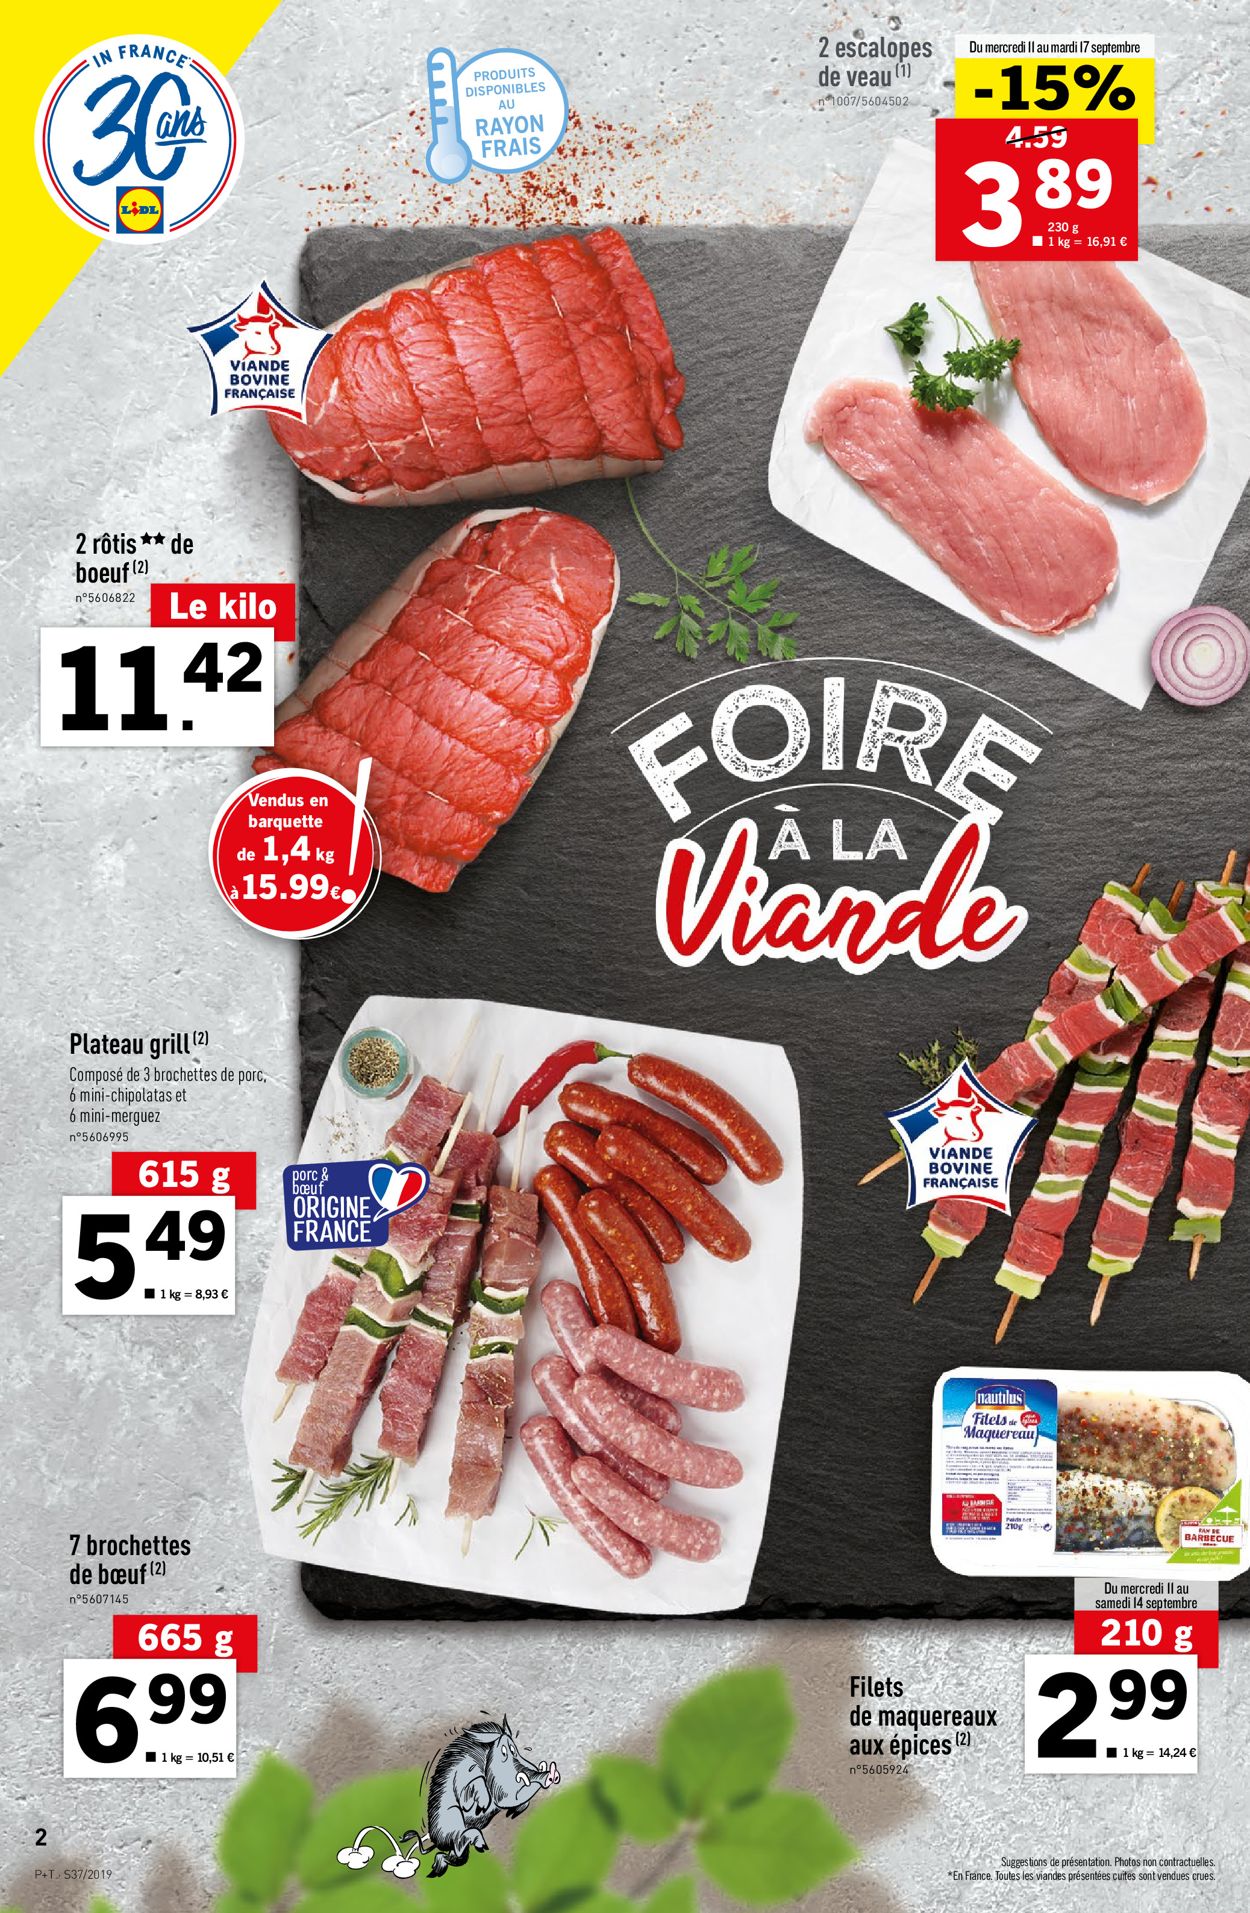 Lidl Catalogue - 11.09-17.09.2019 (Page 2)